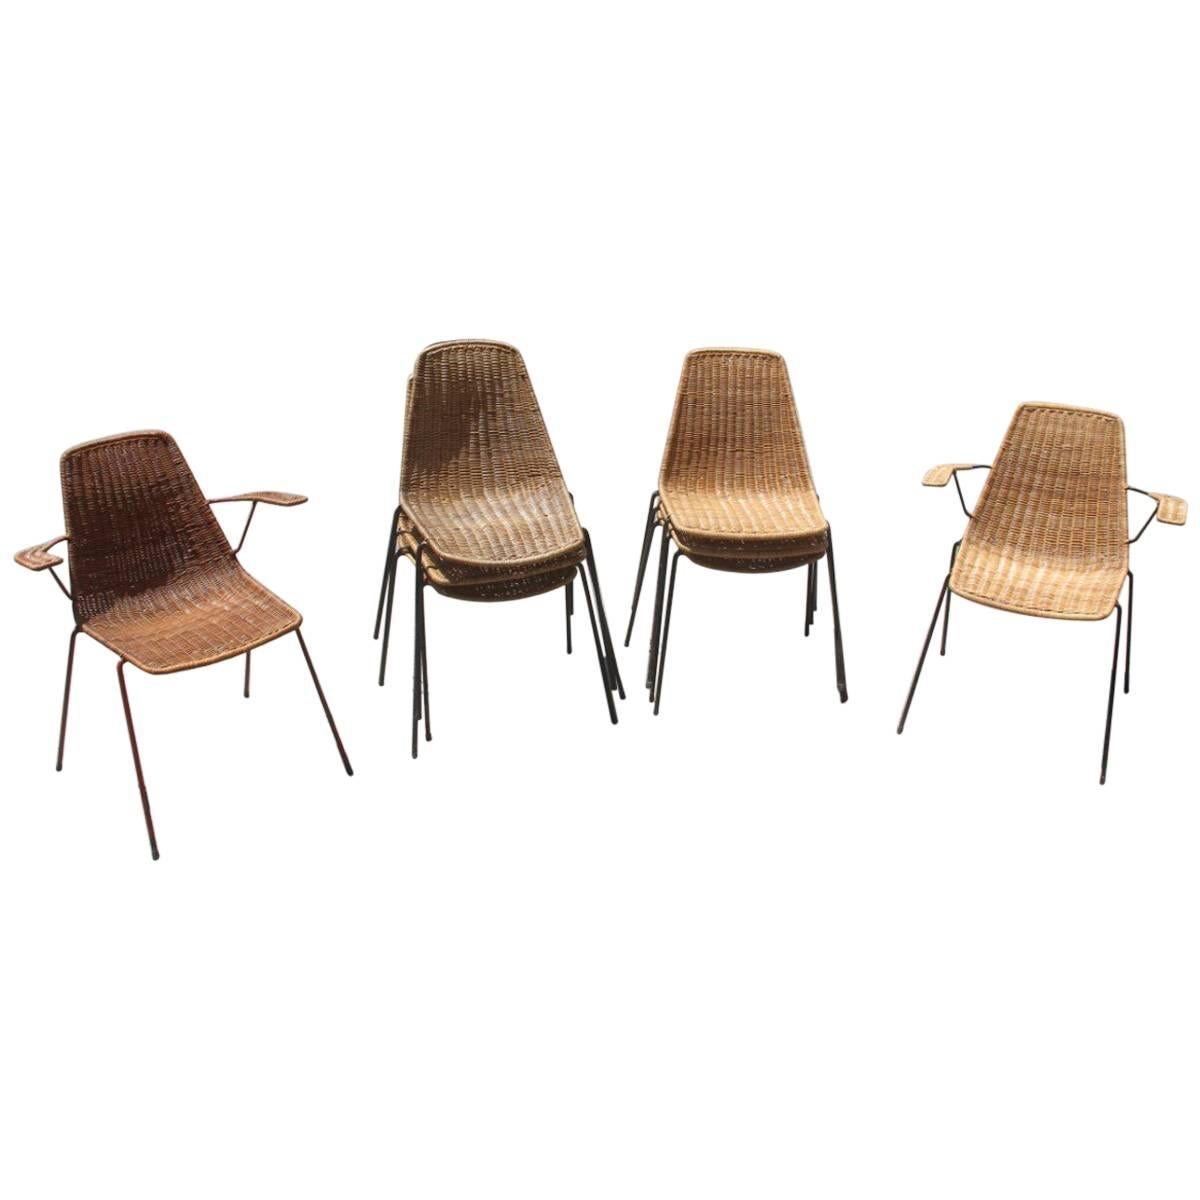 Italian Midcentury Metal and Bamboo Design Chairs Campo & Graffi for Home, 1950s